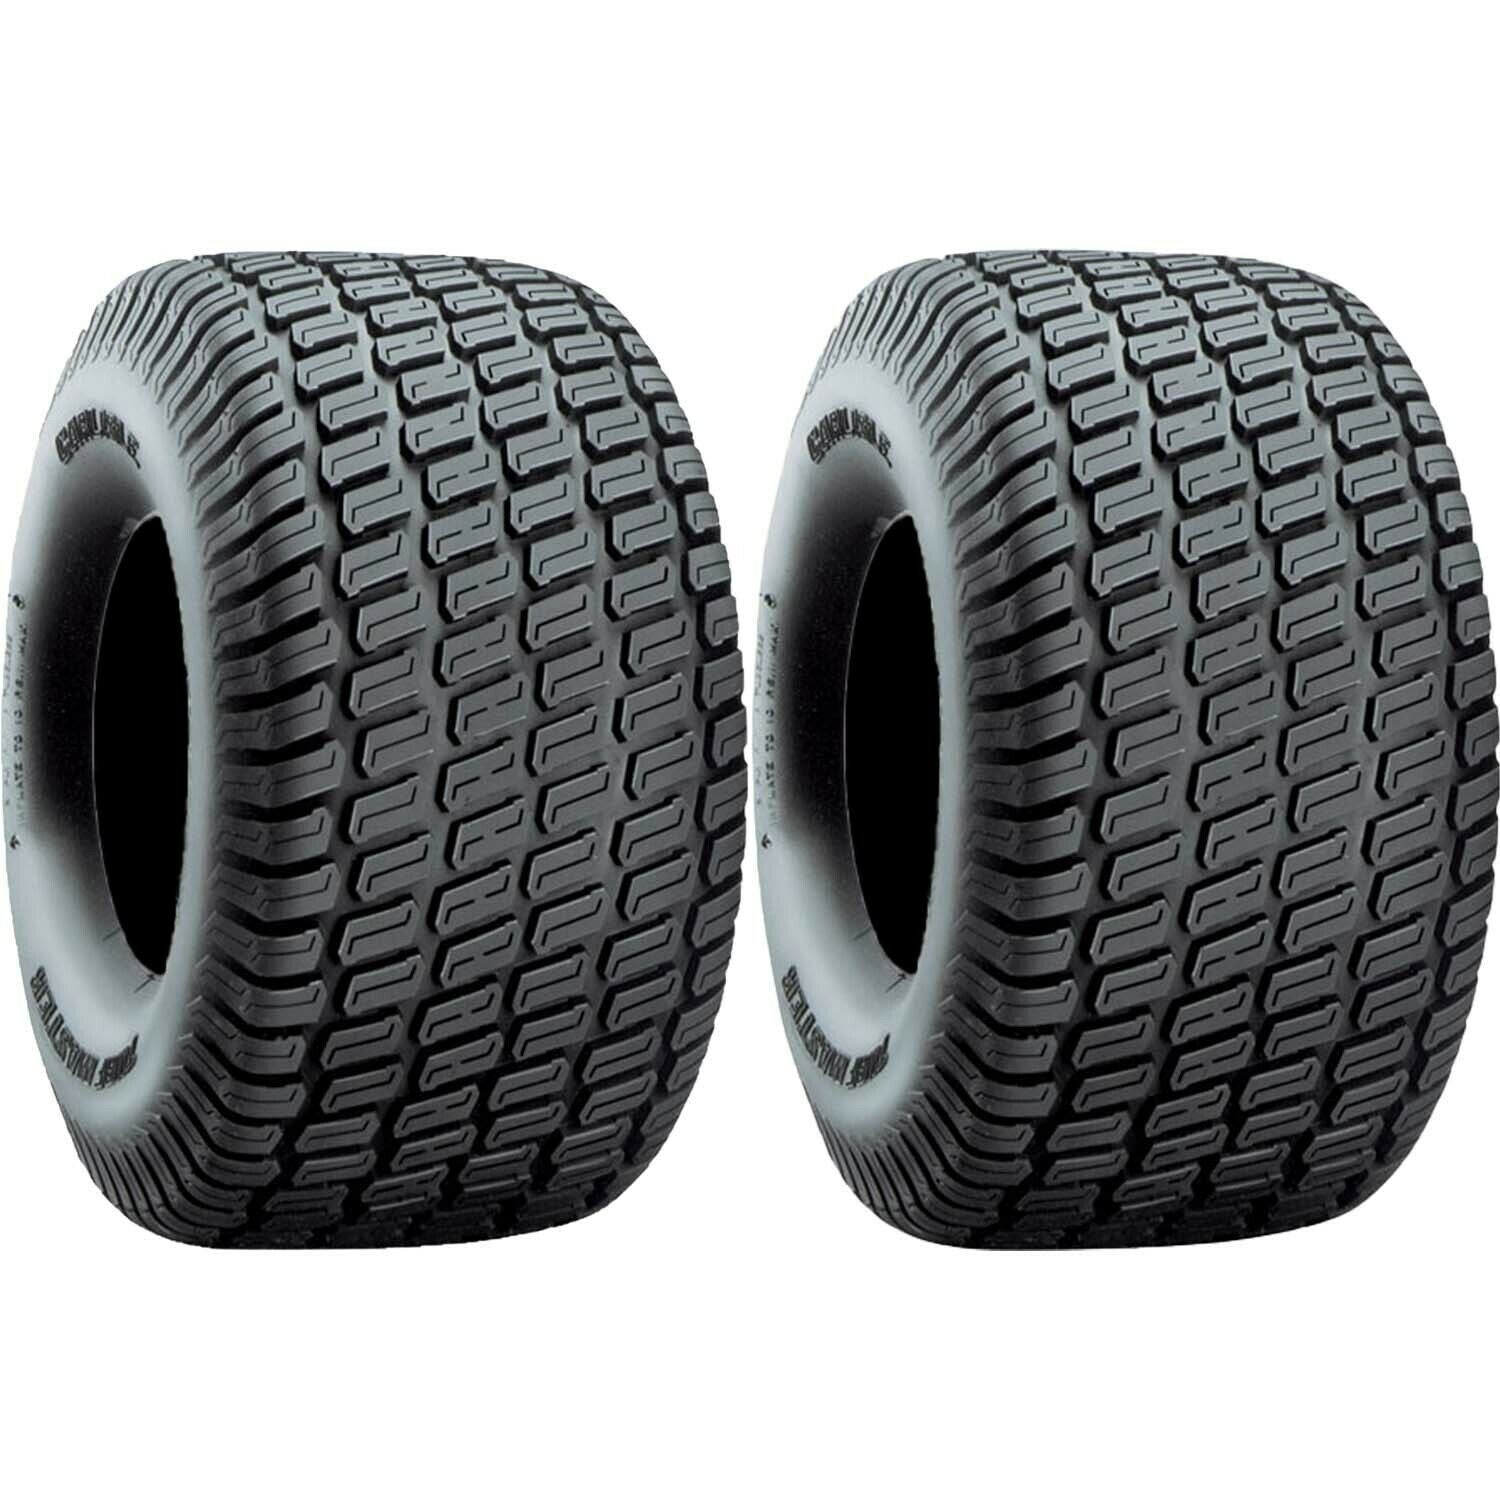 Carlisle Turf Master Lawn and Garden Tire 4Ply 22x10.00-10 Pack of 2